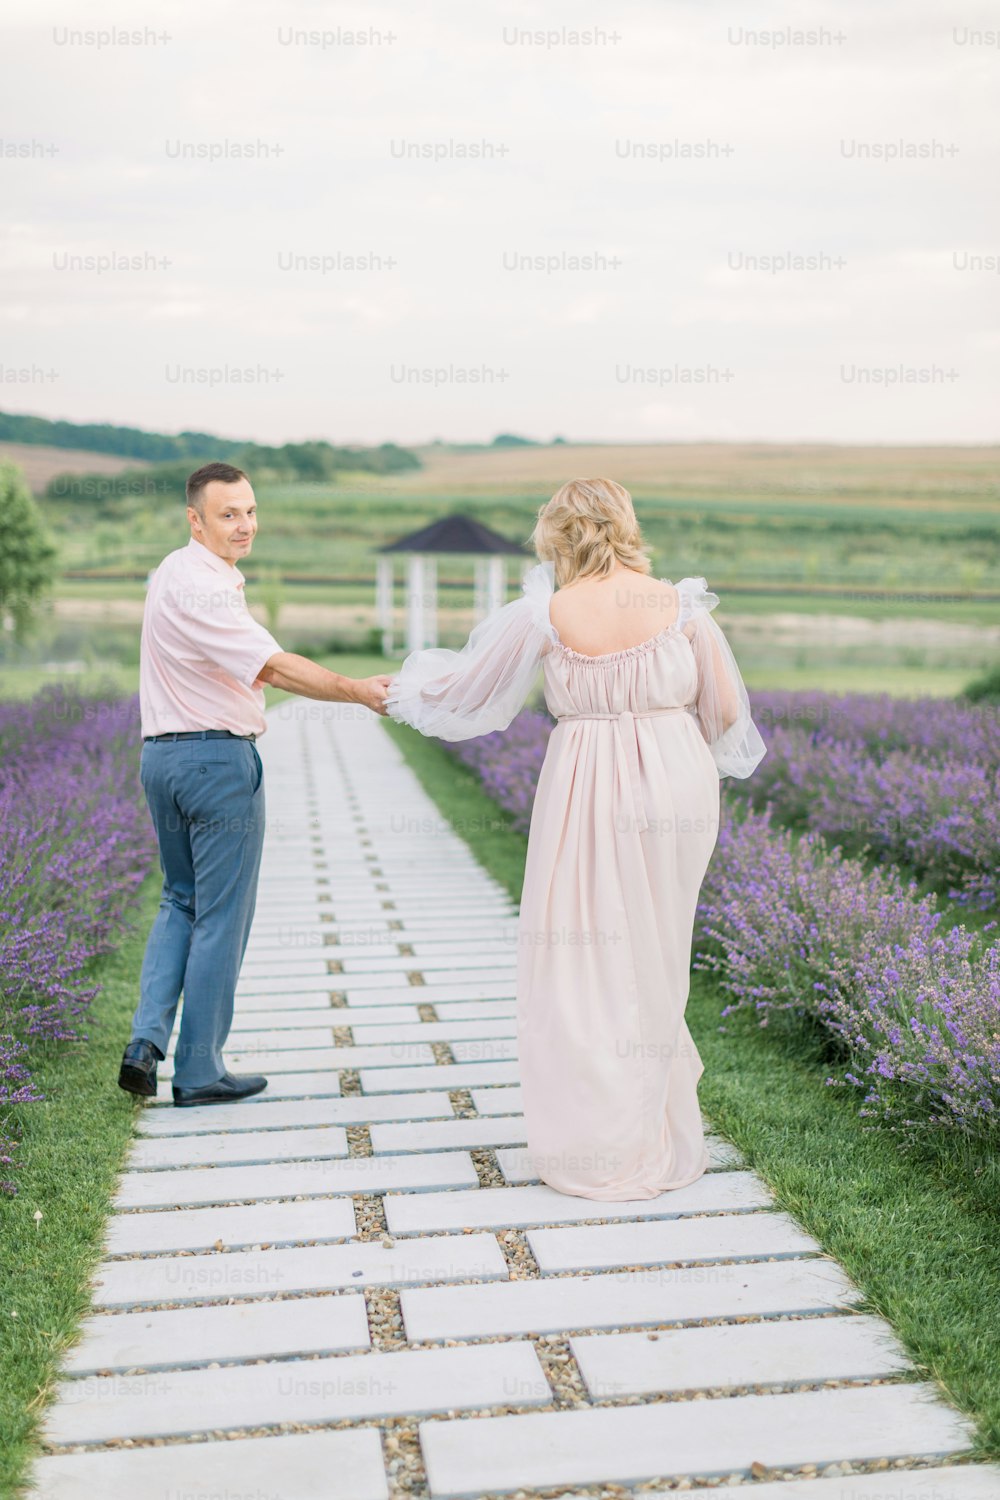 Outdoor shot of happy romantic mature couple in love walking on pathway through flowering lavender field, holding hands and enjoying moments together